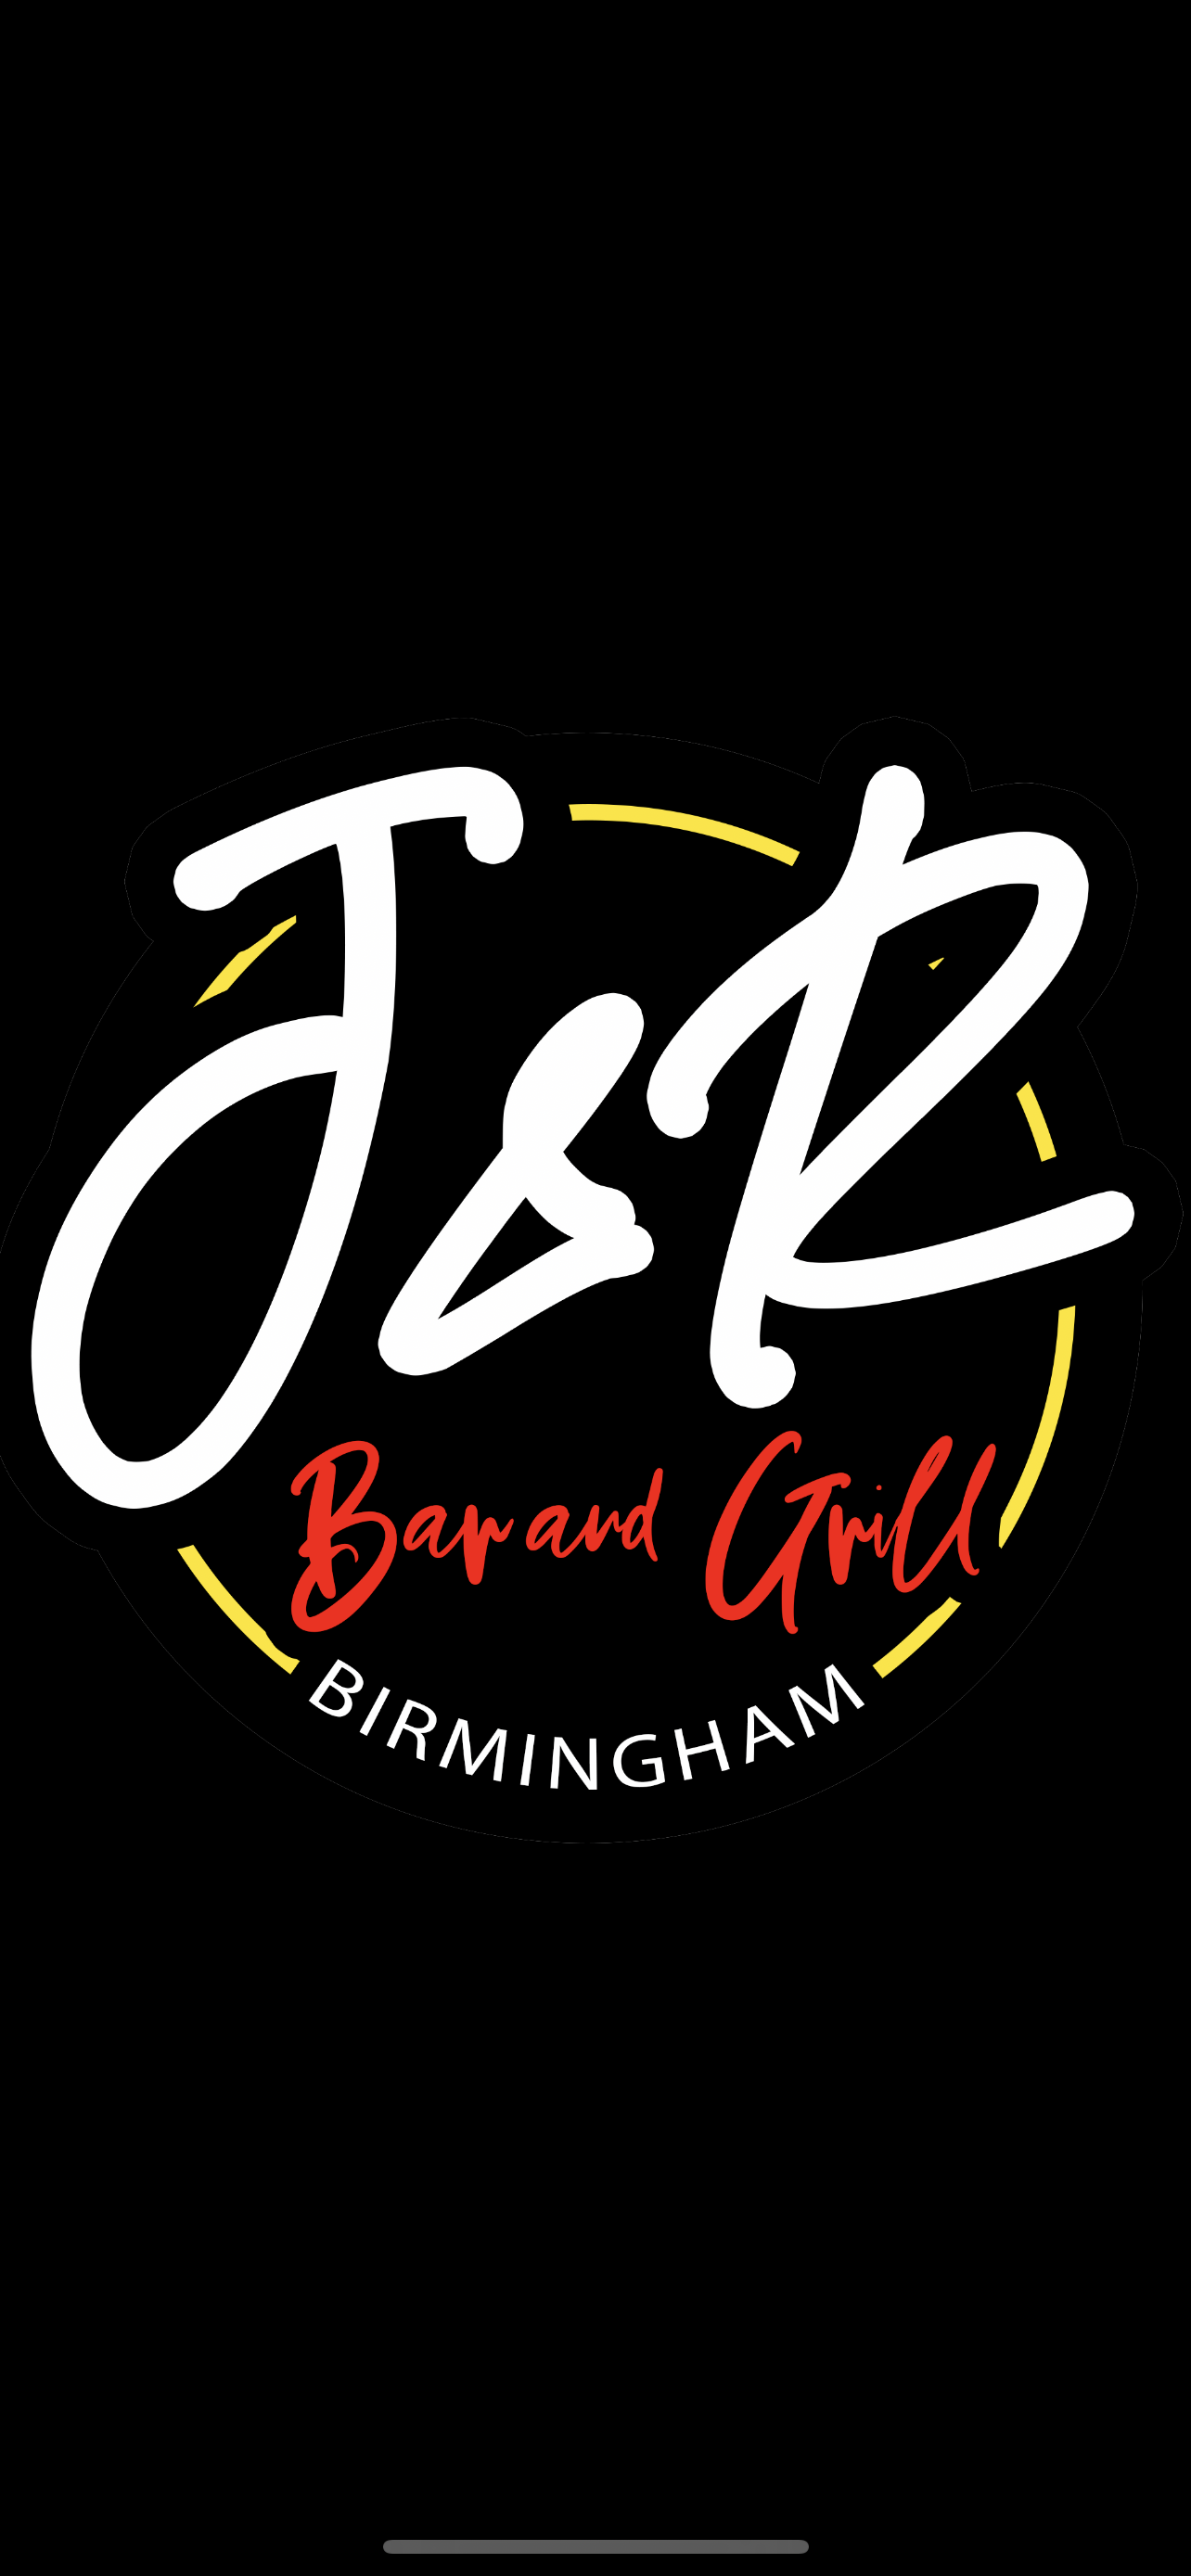 J&R Bar and Grill